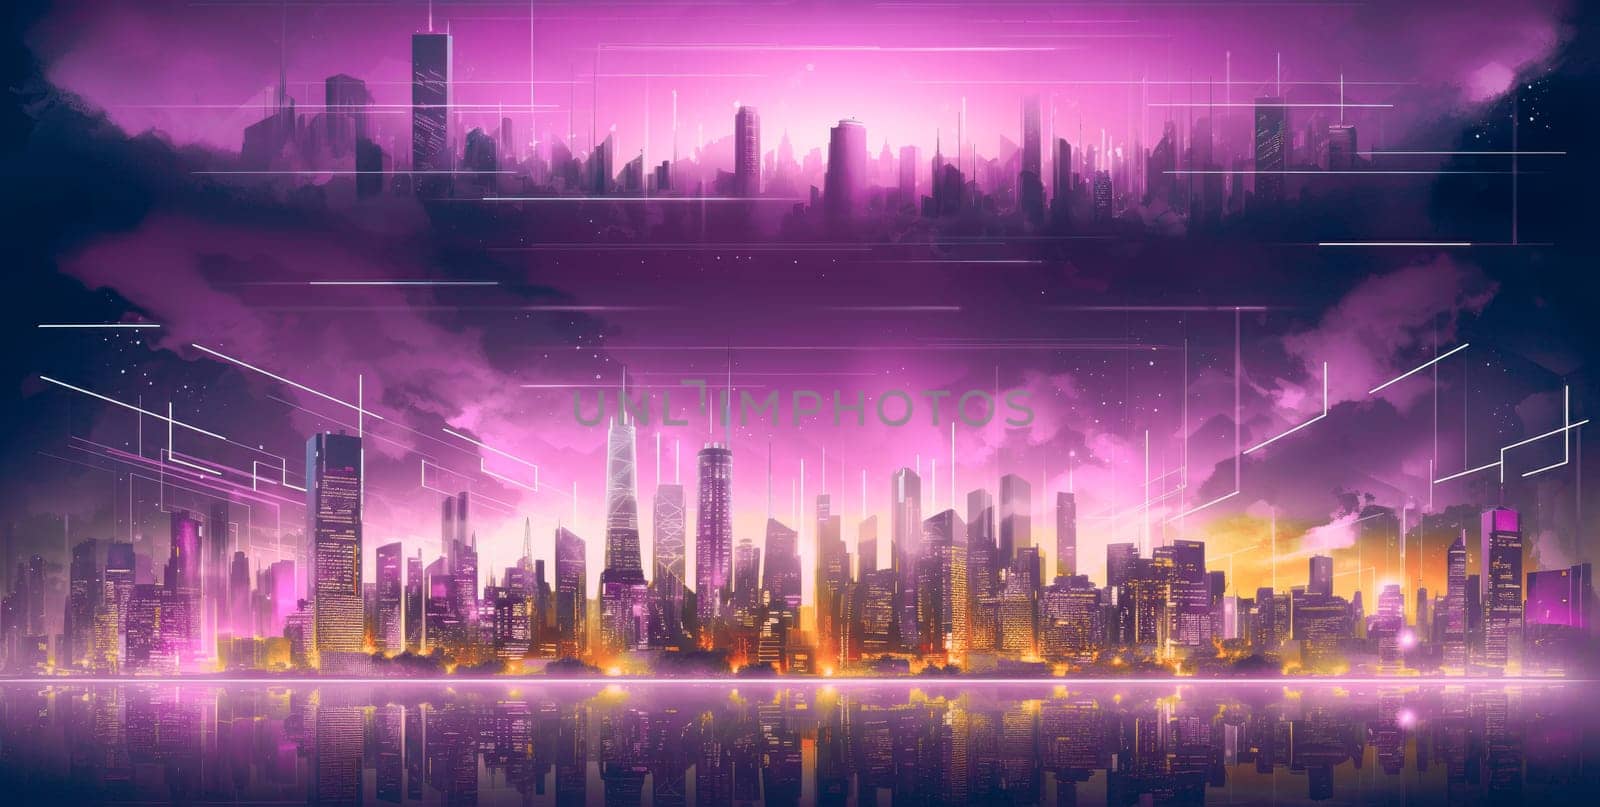 Abstract futuristic night city, Concept for IOT, smart city by biancoblue